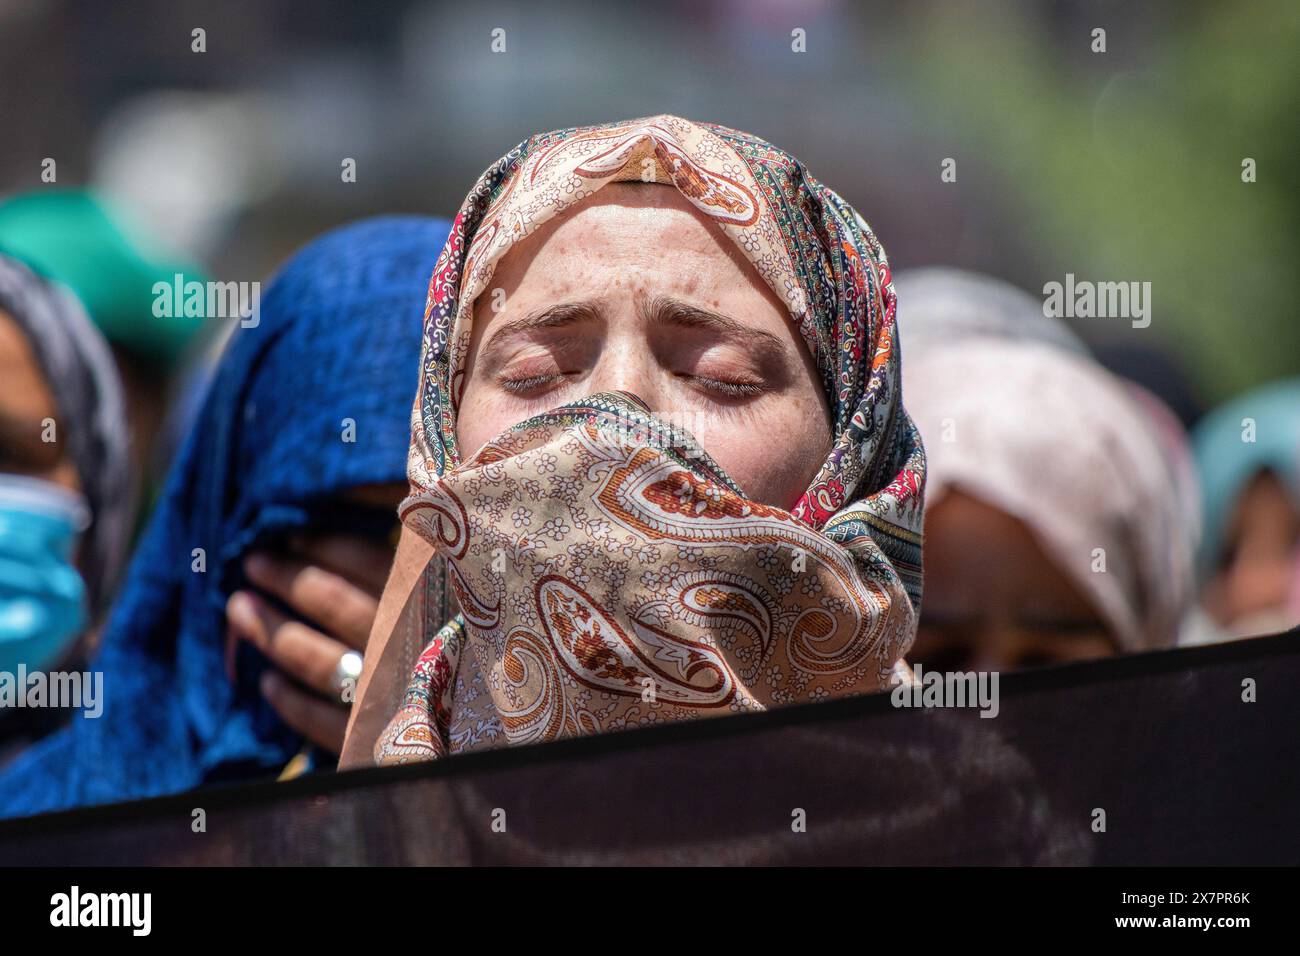 May 21, 2024, Srinagar, India: A Muslim woman mourns the death of Iranian President Ebrahim Raisi and other officials during a rally in Srinagar Hundreds of demonstrators gathered for the march to mourn the tragic death of Iran's President Ebrahim Raisi, along with the country's foreign minister Hossein Amirabdollahian and other officials. The officials were found dead on May 20 after rescue teams found their helicopter crashed in dense fog in a mountainous region of the country's northwest, officials and state media said. (Credit Image: © Faisal Bashir/SOPA Images via ZUMA Press Wire) EDITORI Stock Photo